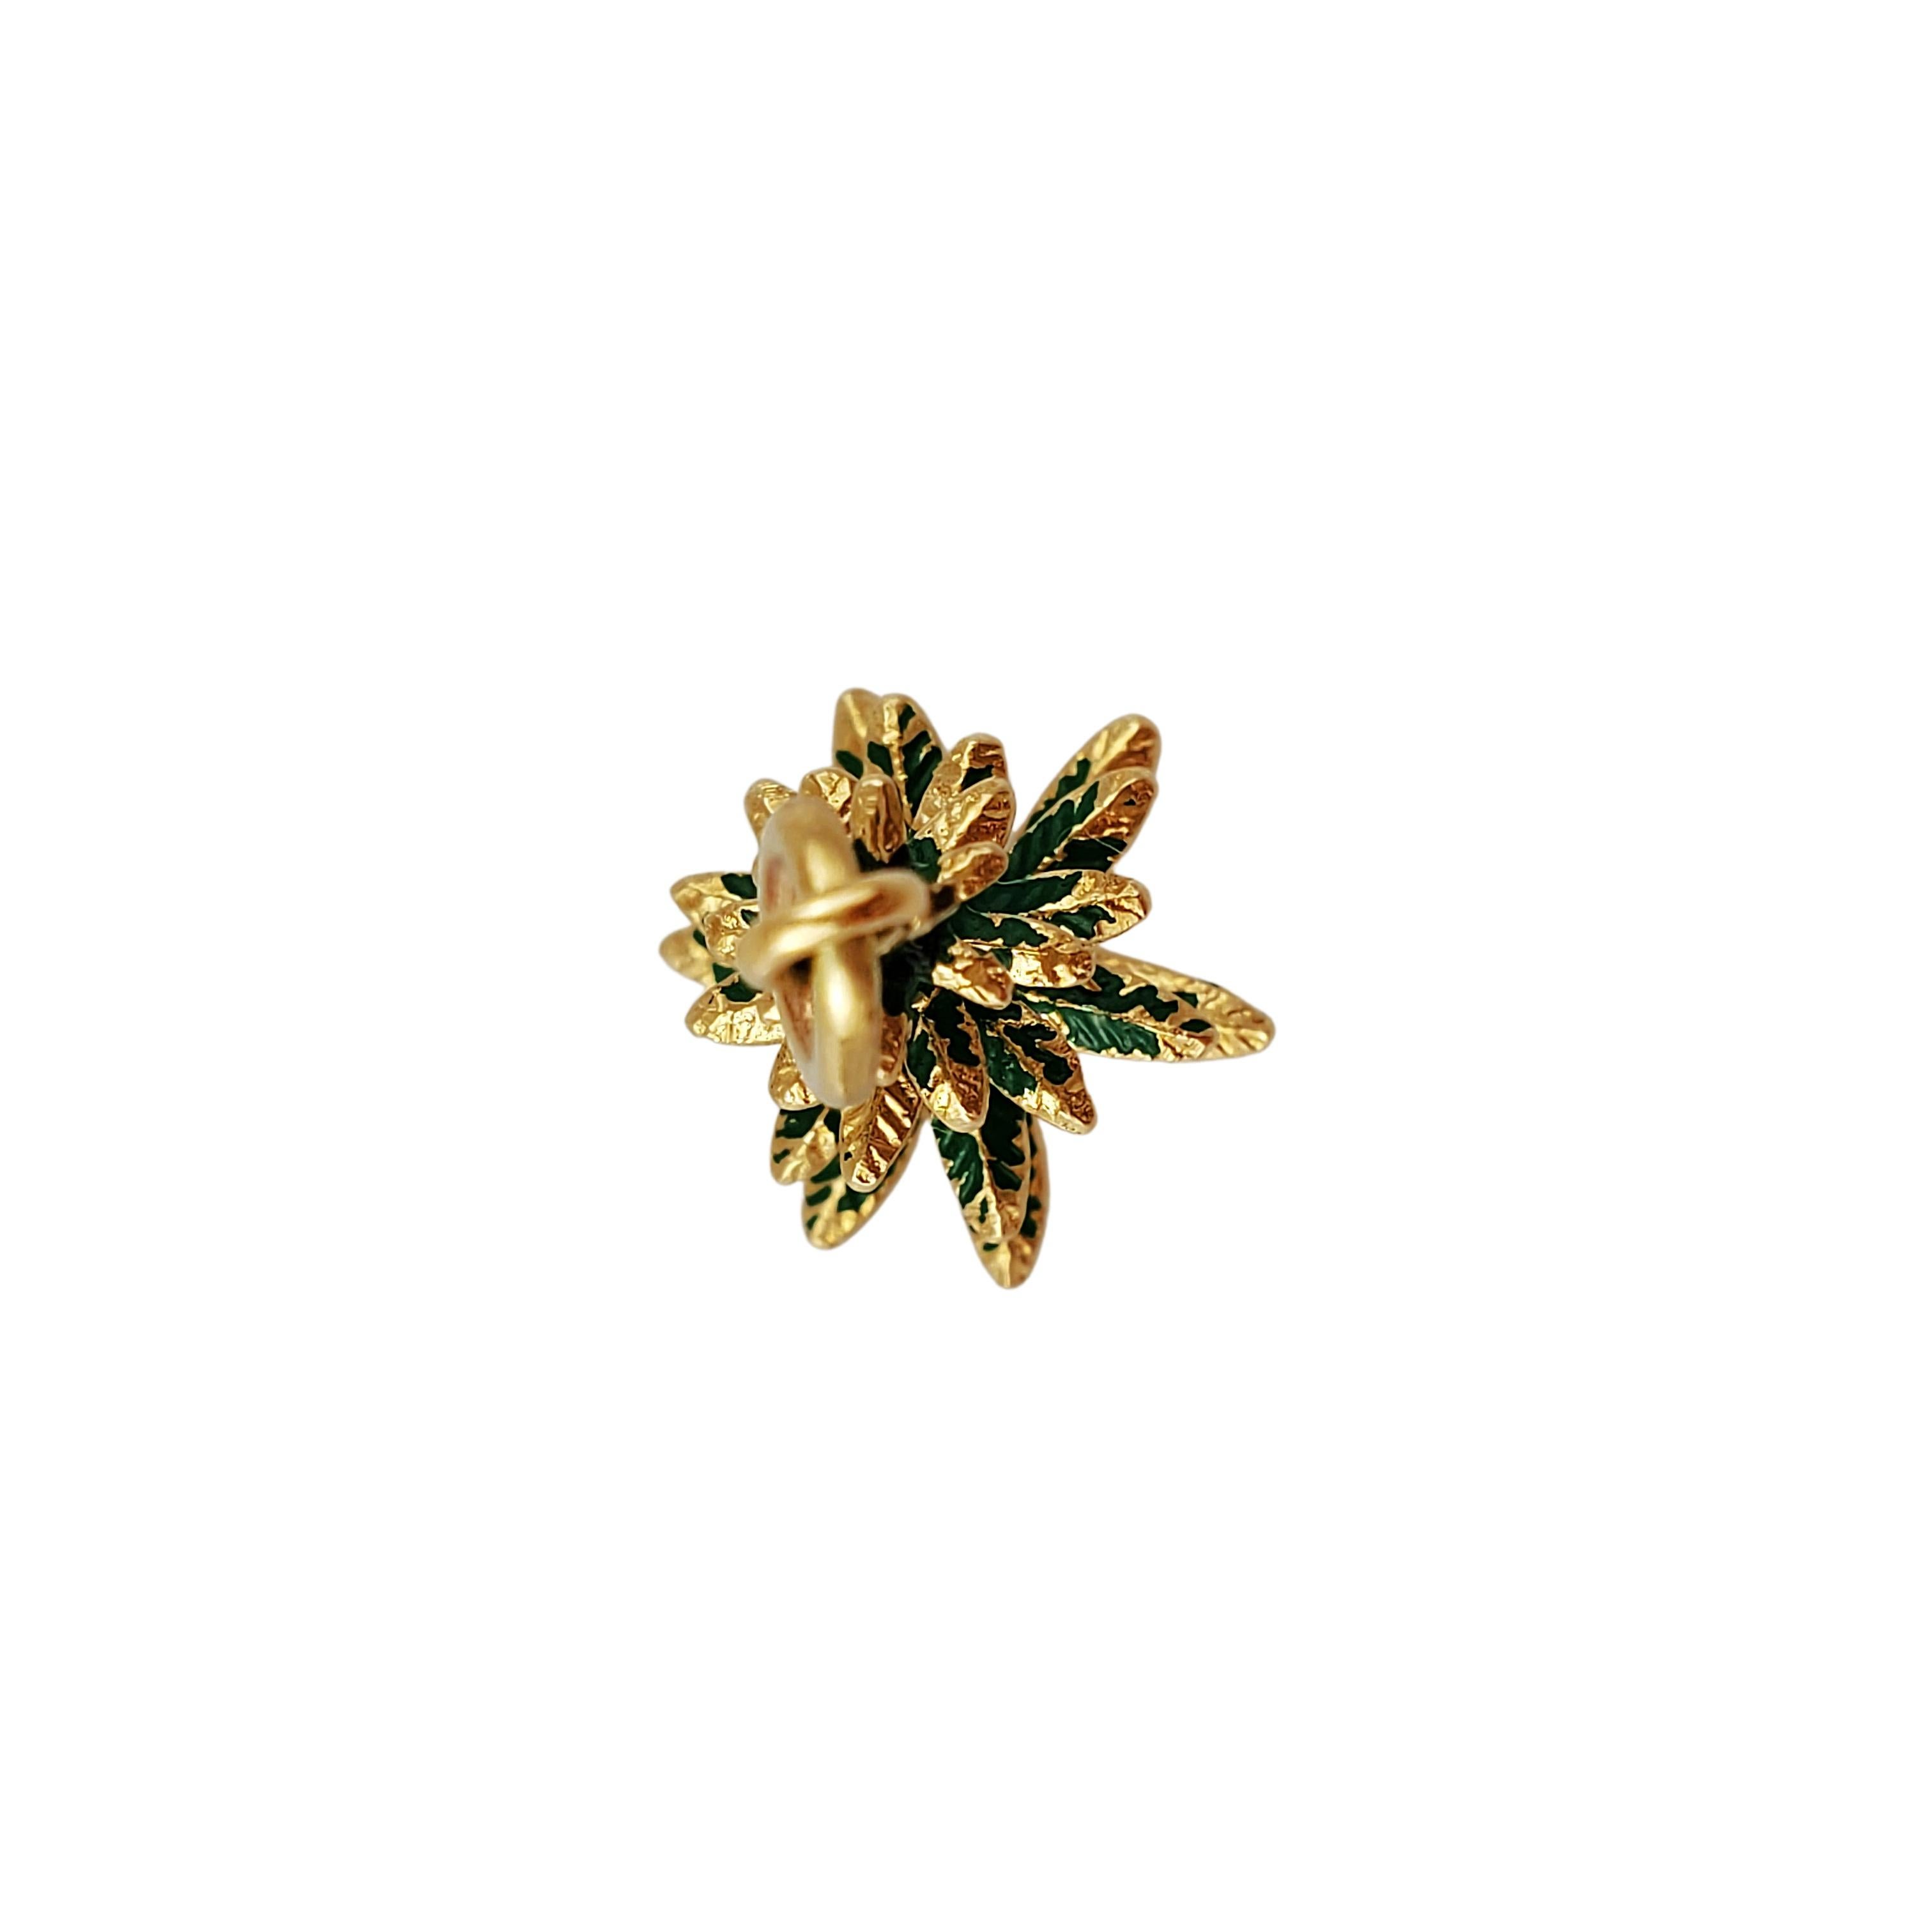 Vintage 14K Yellow Gold and Enamel Christmas Tree Charm

Celebrate the holidays with Christmas cheer!

This beautiful 3D charm features a green enamel (slightly worn) Christmas Tree detailed in 14K yellow gold.

*Chain not included.

Size: 22mm long